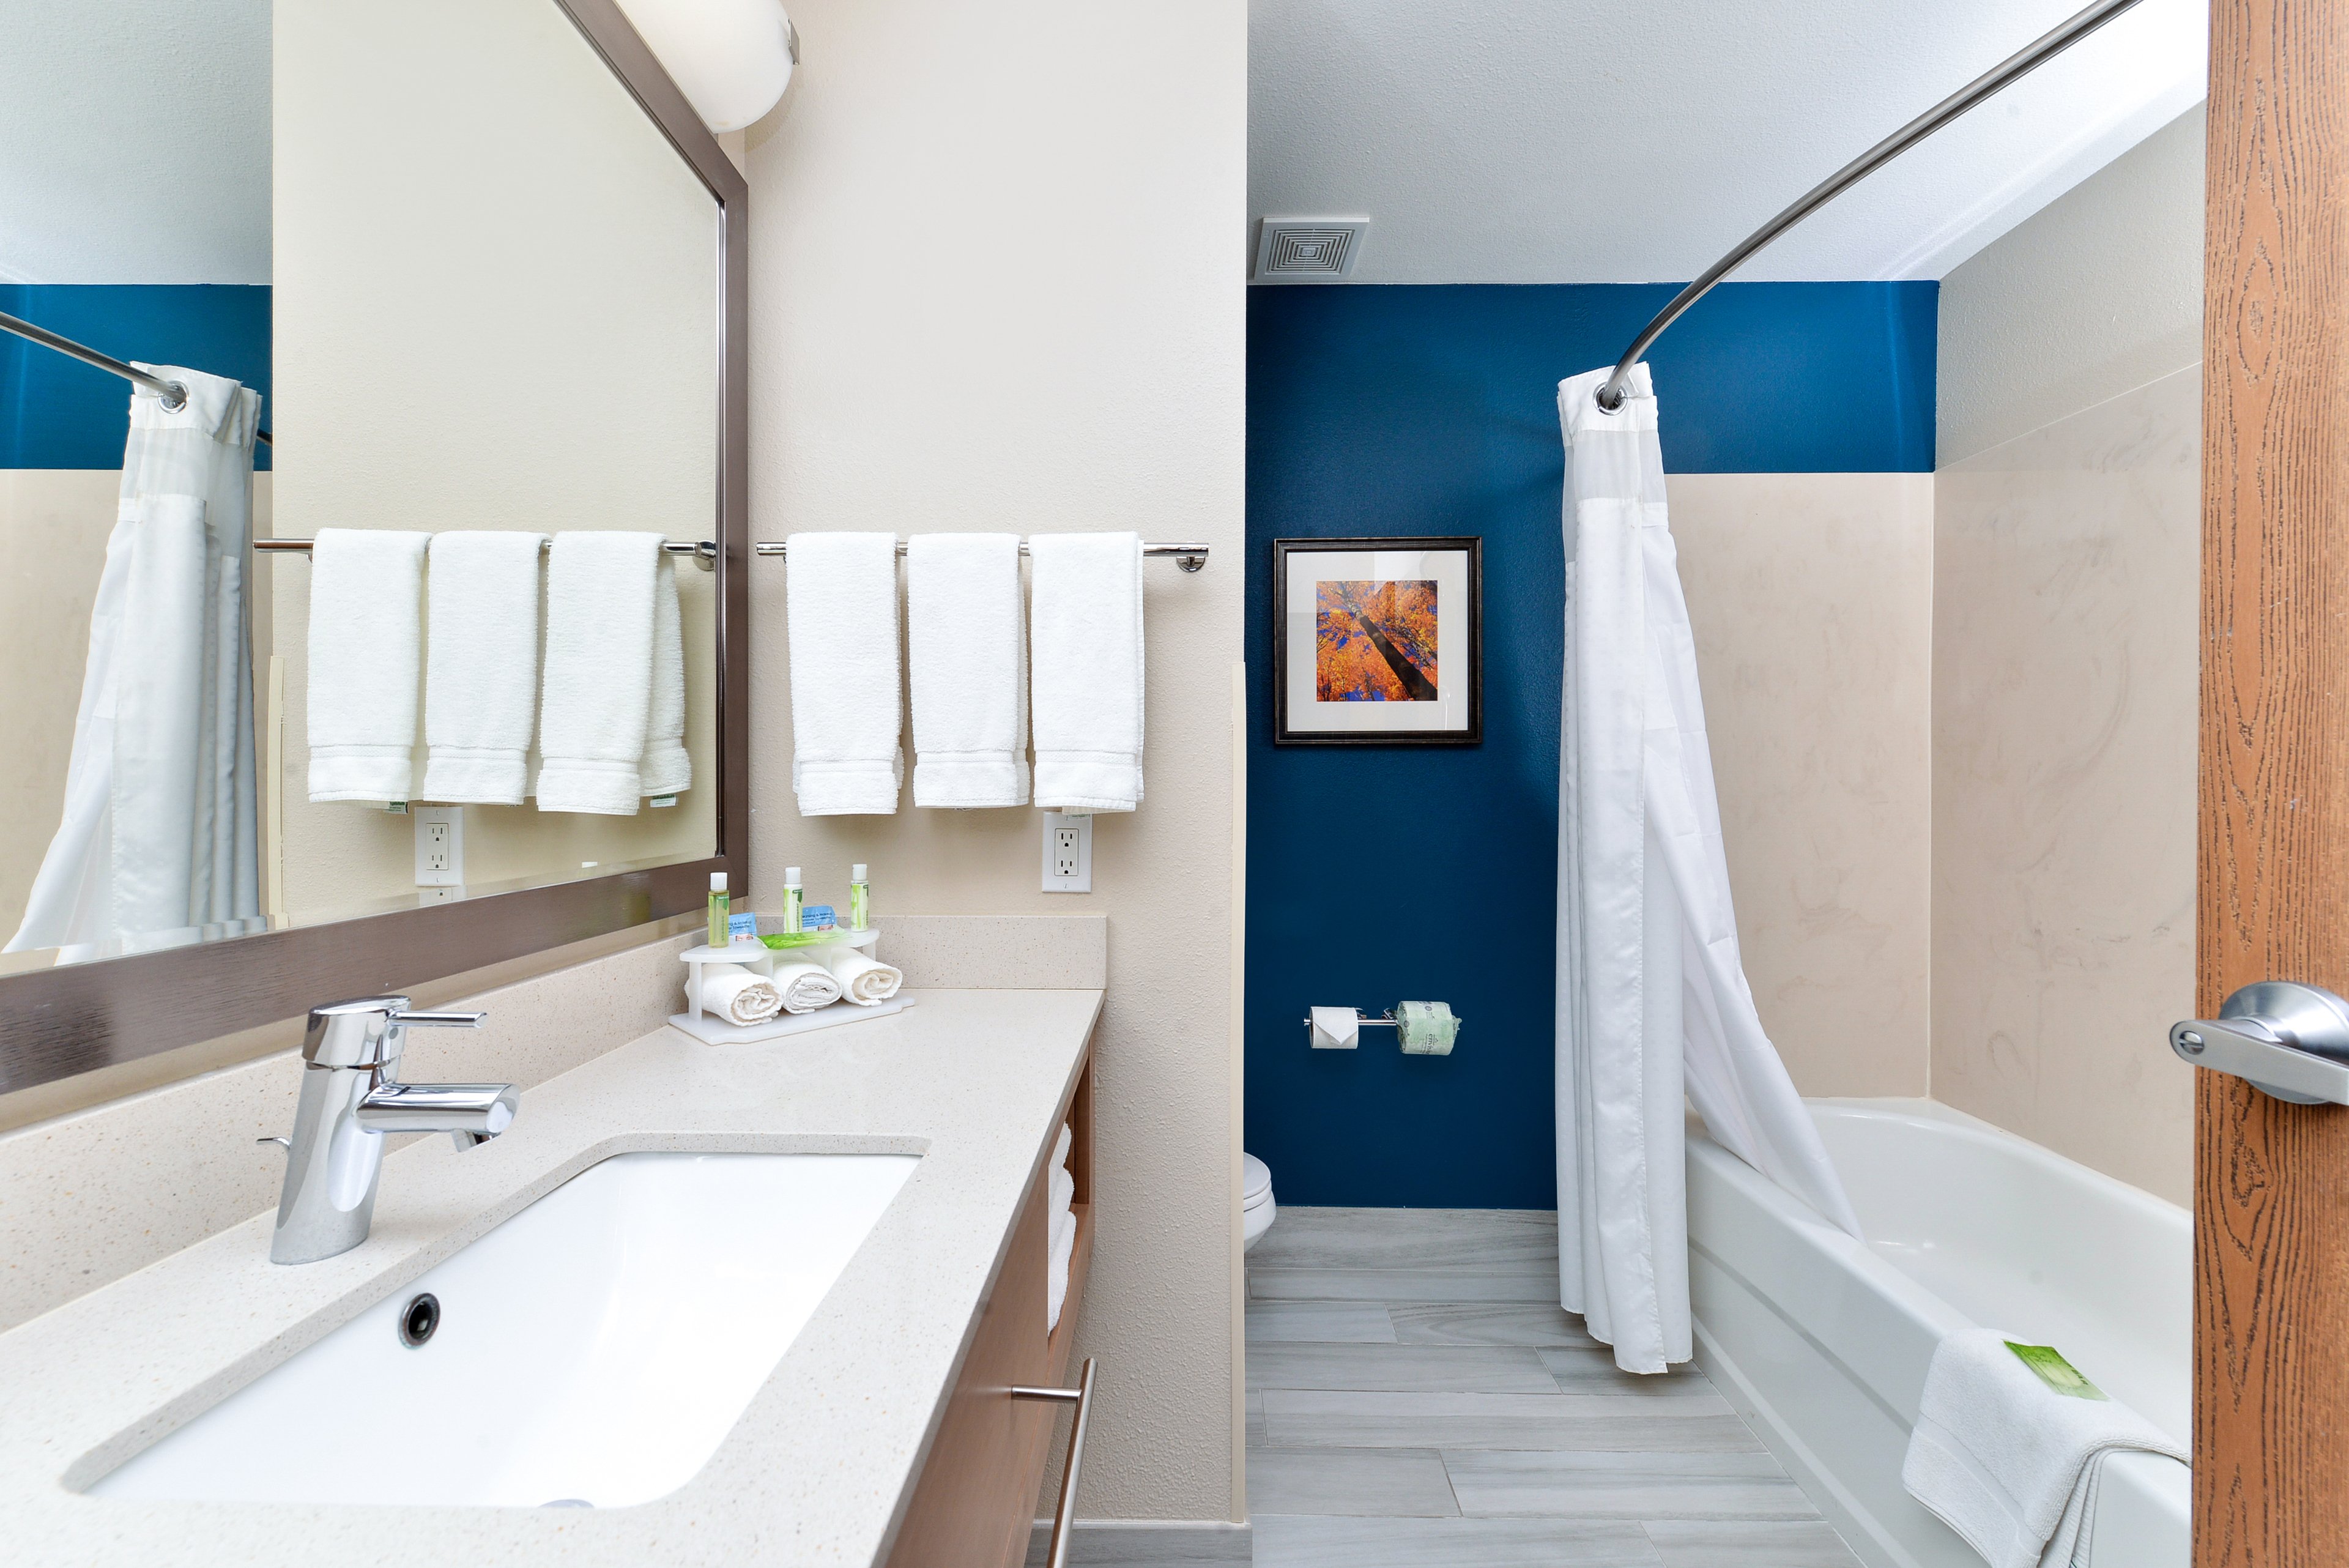 Our modern style guest bathrooms feature everything you need.